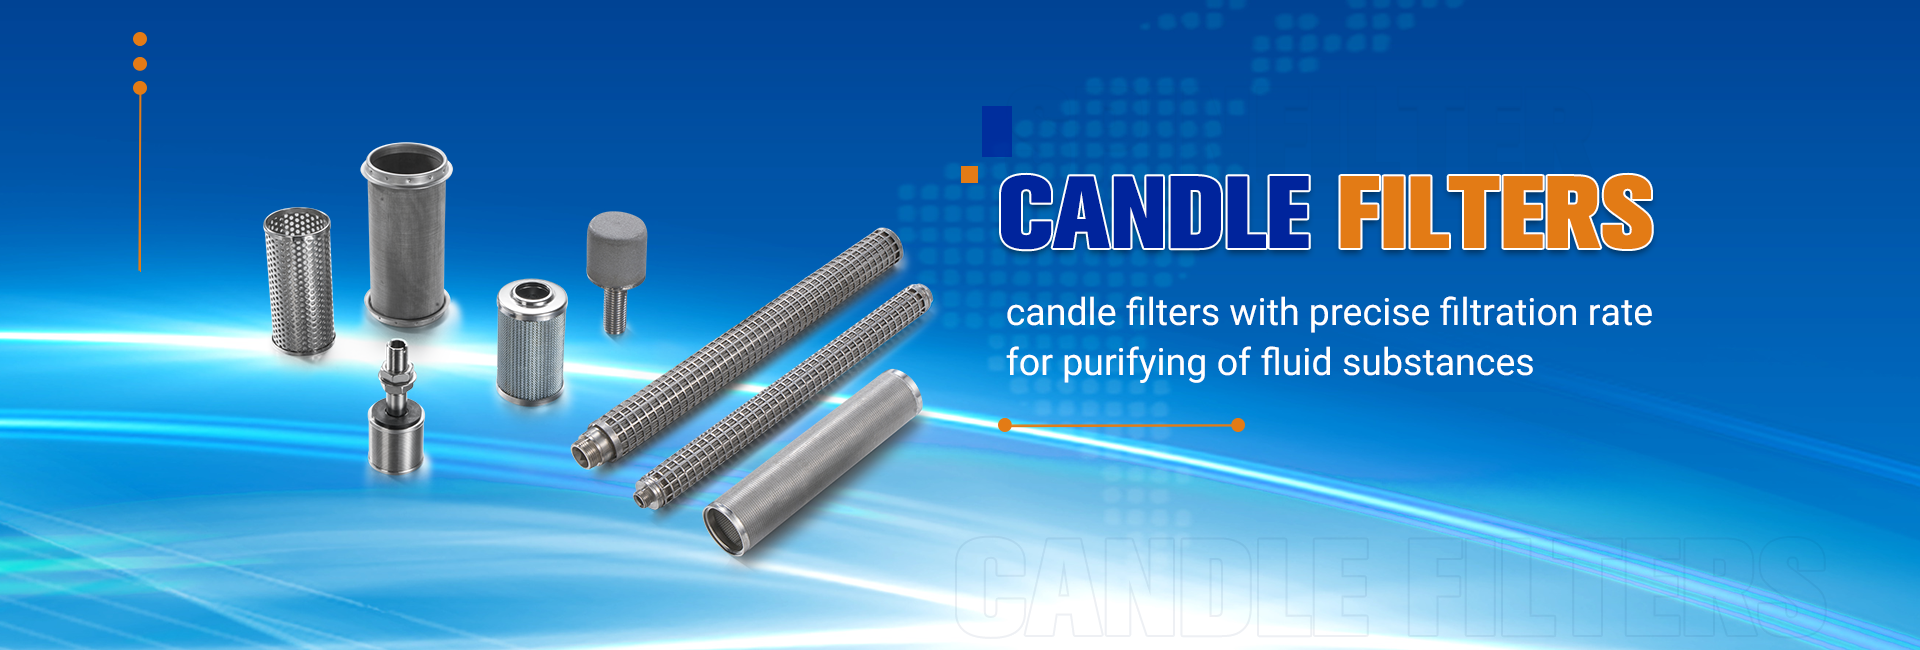 CANDLE FILTERS